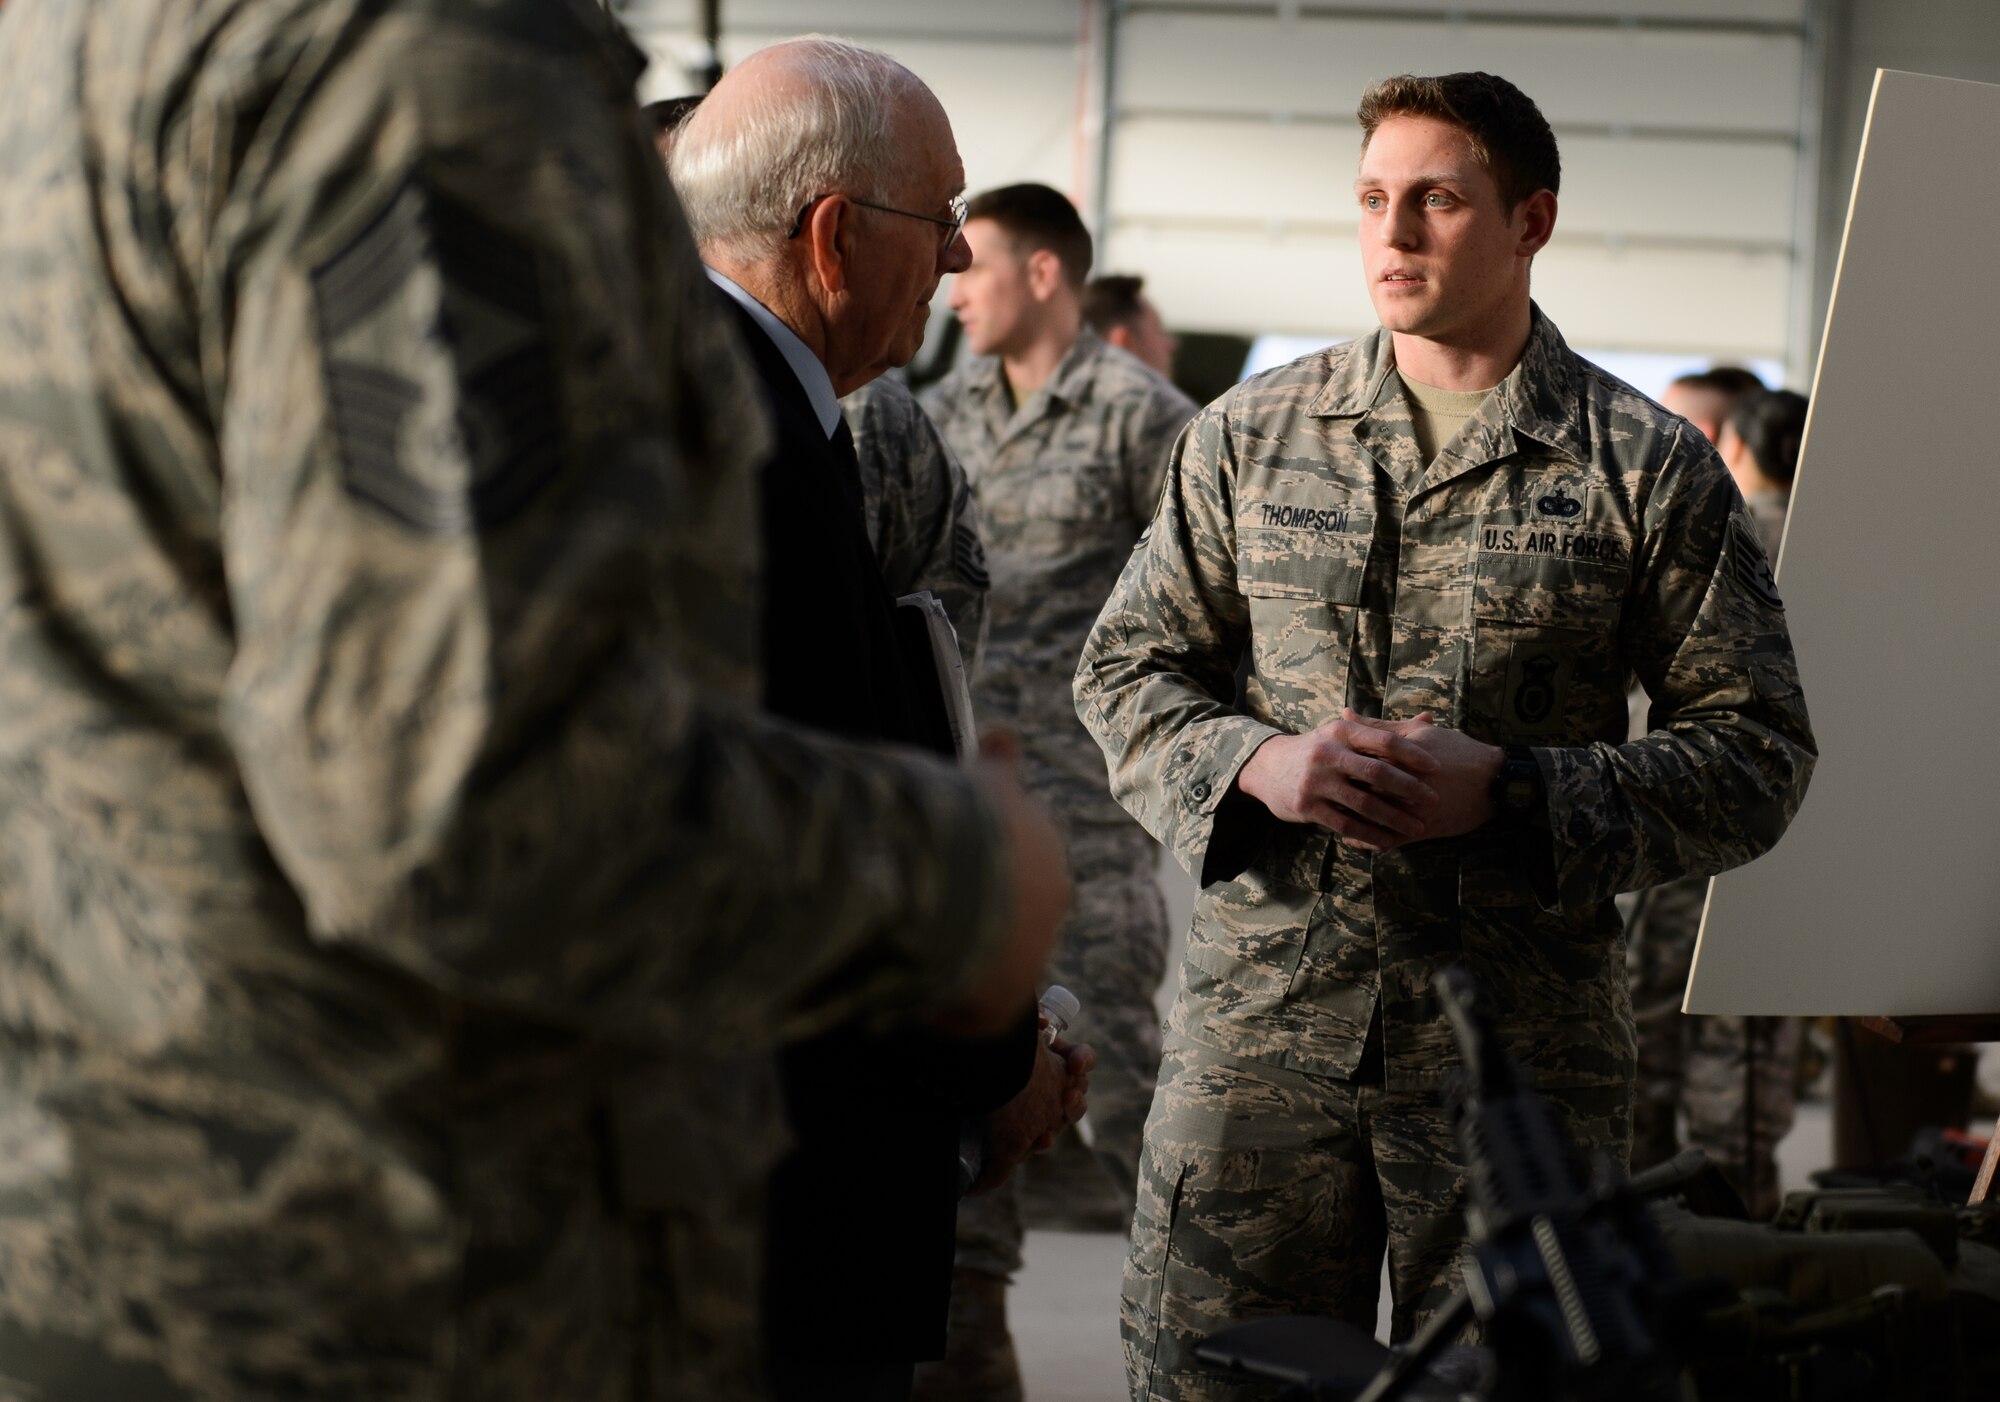 Staff Sgt. Michael Thompson, 435th Security Forces Squadron fly-away security team NCO in charge, explains the courses taught by his squadron to Sam E. Parish, retired Chief Master Sergeant of the Air Force, Jan. 26, 2016 at Ramstein Air Base, Germany. Many of the 435th Air Ground Operations Wing units showcased their missions to Parish during his visit to Ramstein. During his visit Parish also learned about the three wings at Ramstein and was the guest speaker at the chief master sergeant’s induction ceremony. (U.S. Air Force photo/Staff Sgt. Armando A. Schwier-Morales)